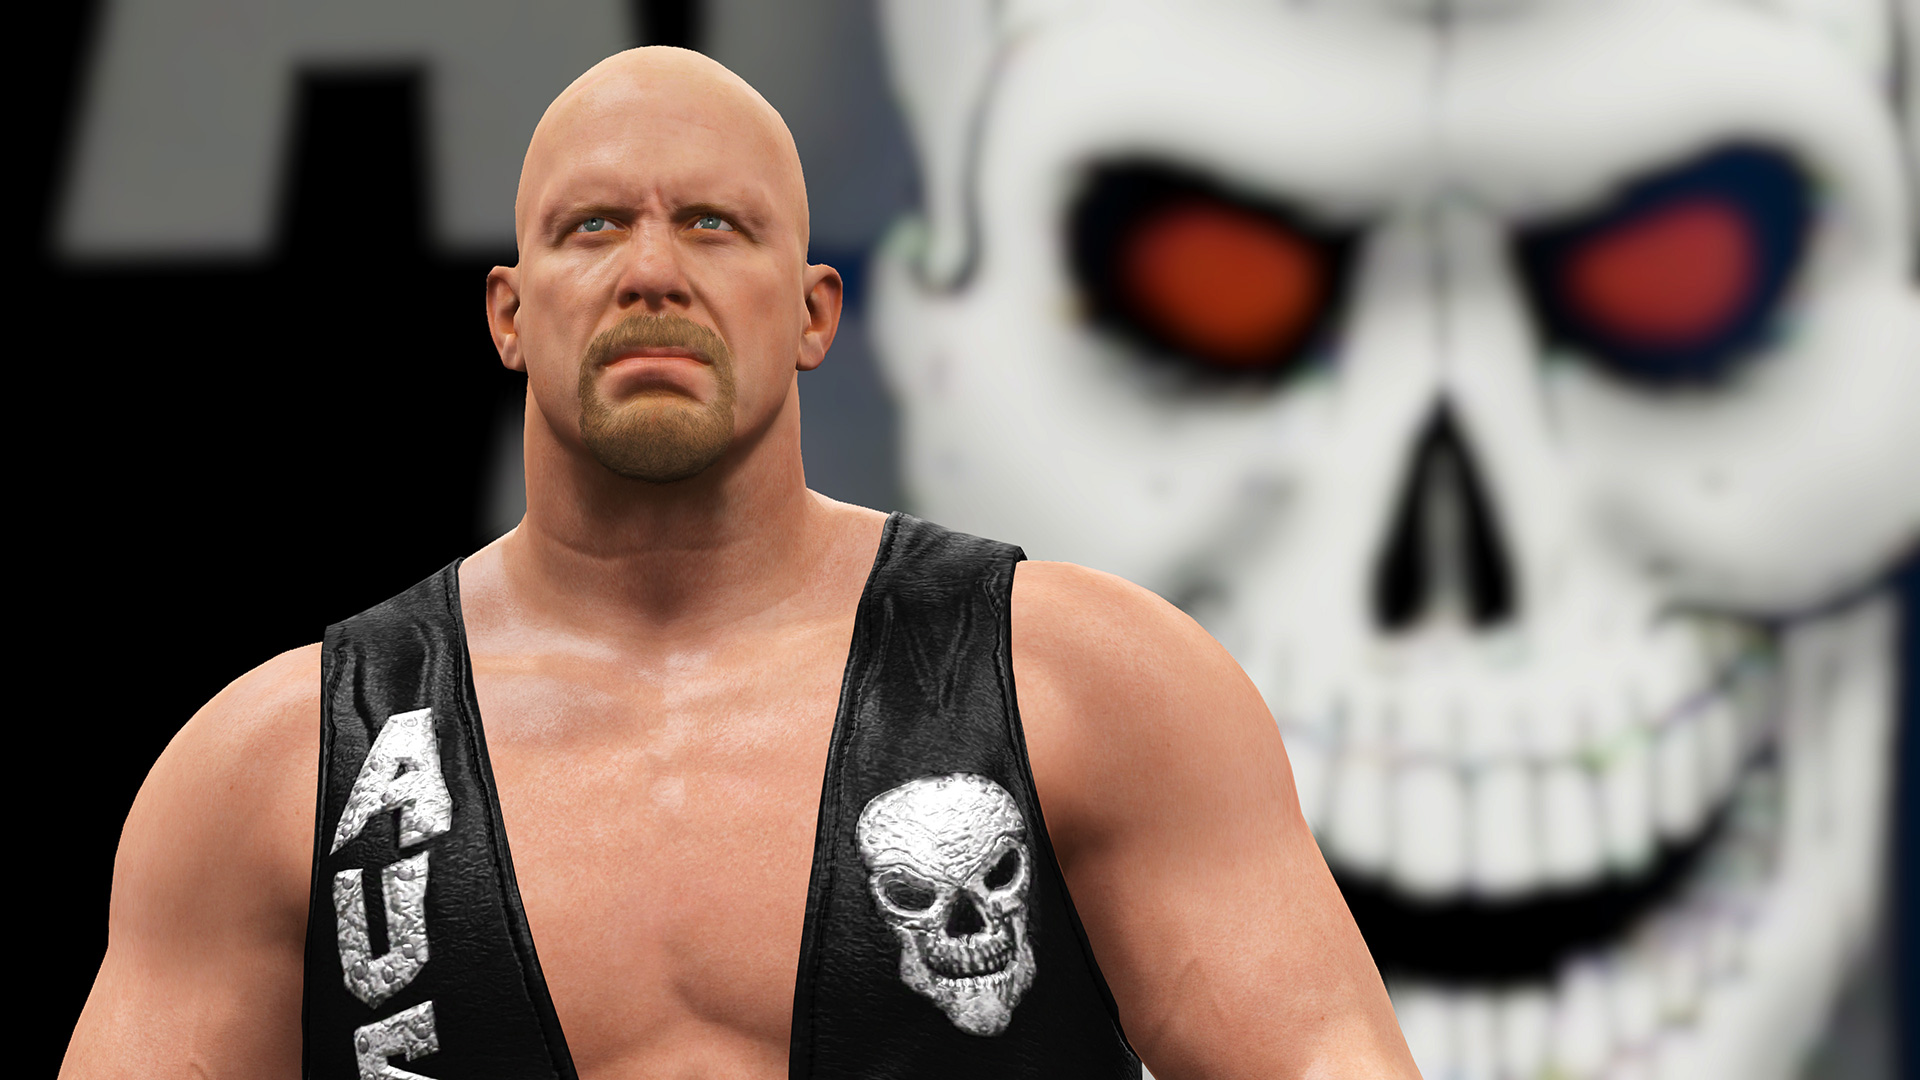 WWE 2K16 [Podcast Review]: This Survivor Series was "Stone Cold".